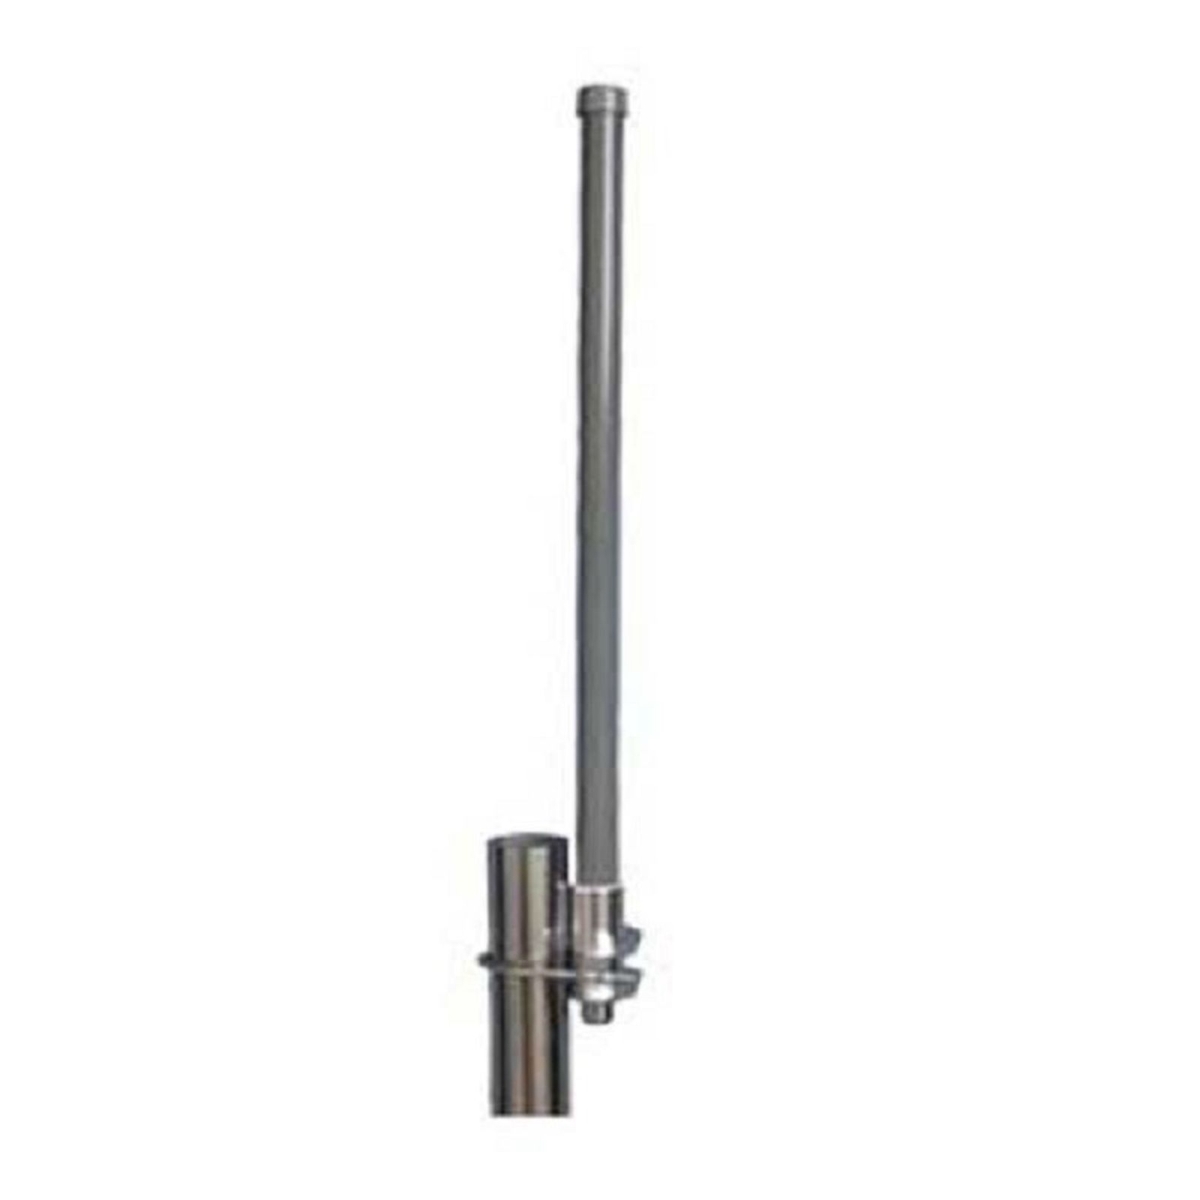 Picture of Turmode WAO24123 Omni-directional WiFi Antenna for 2.4GHz